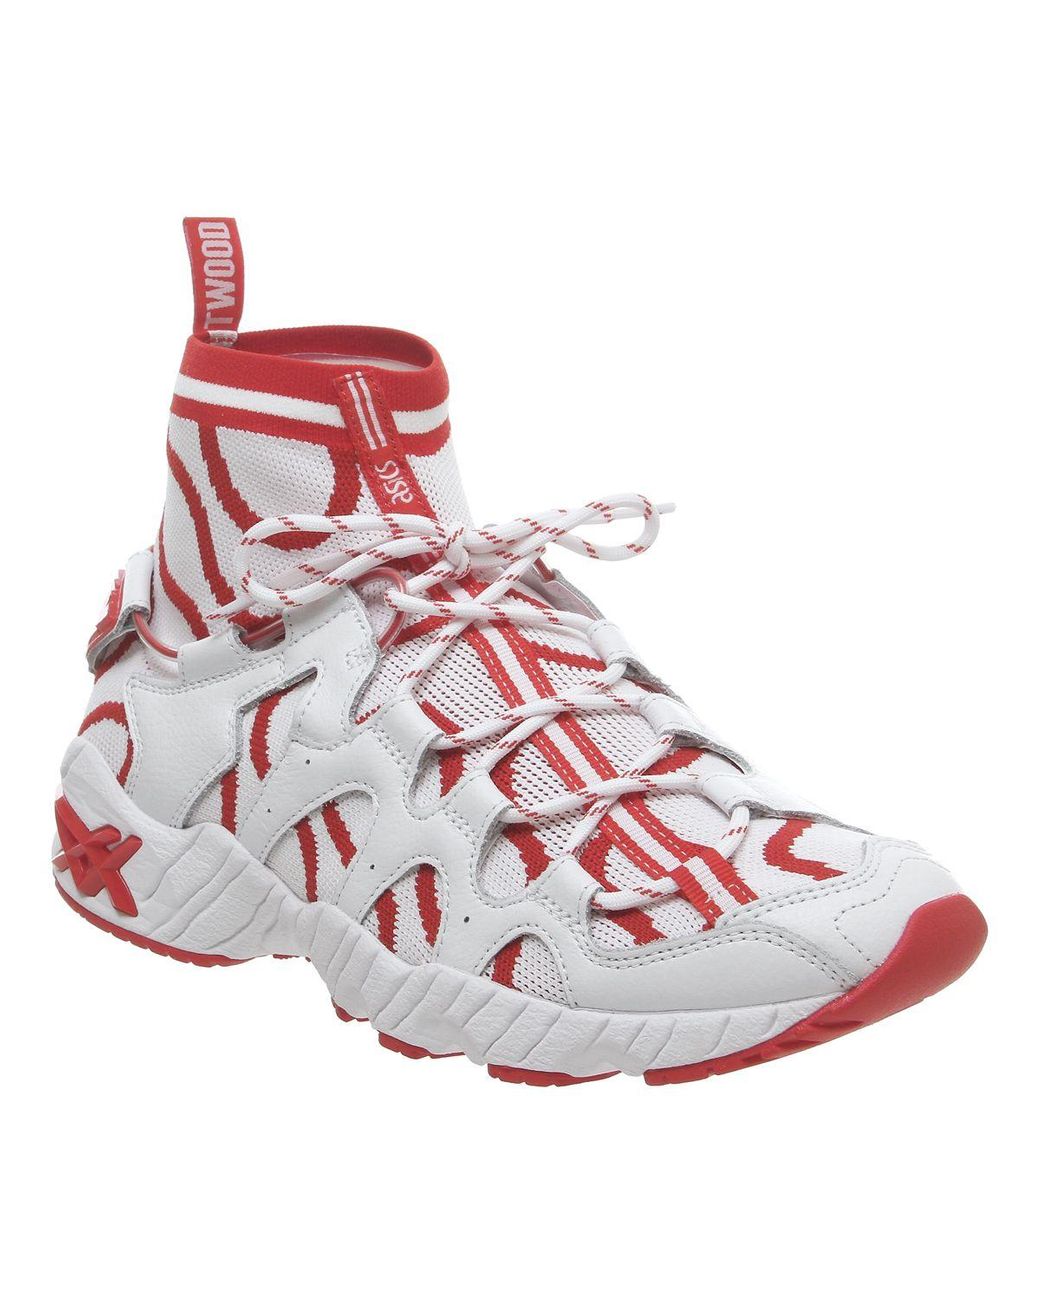 asics gel-mai trainers with fluro detail